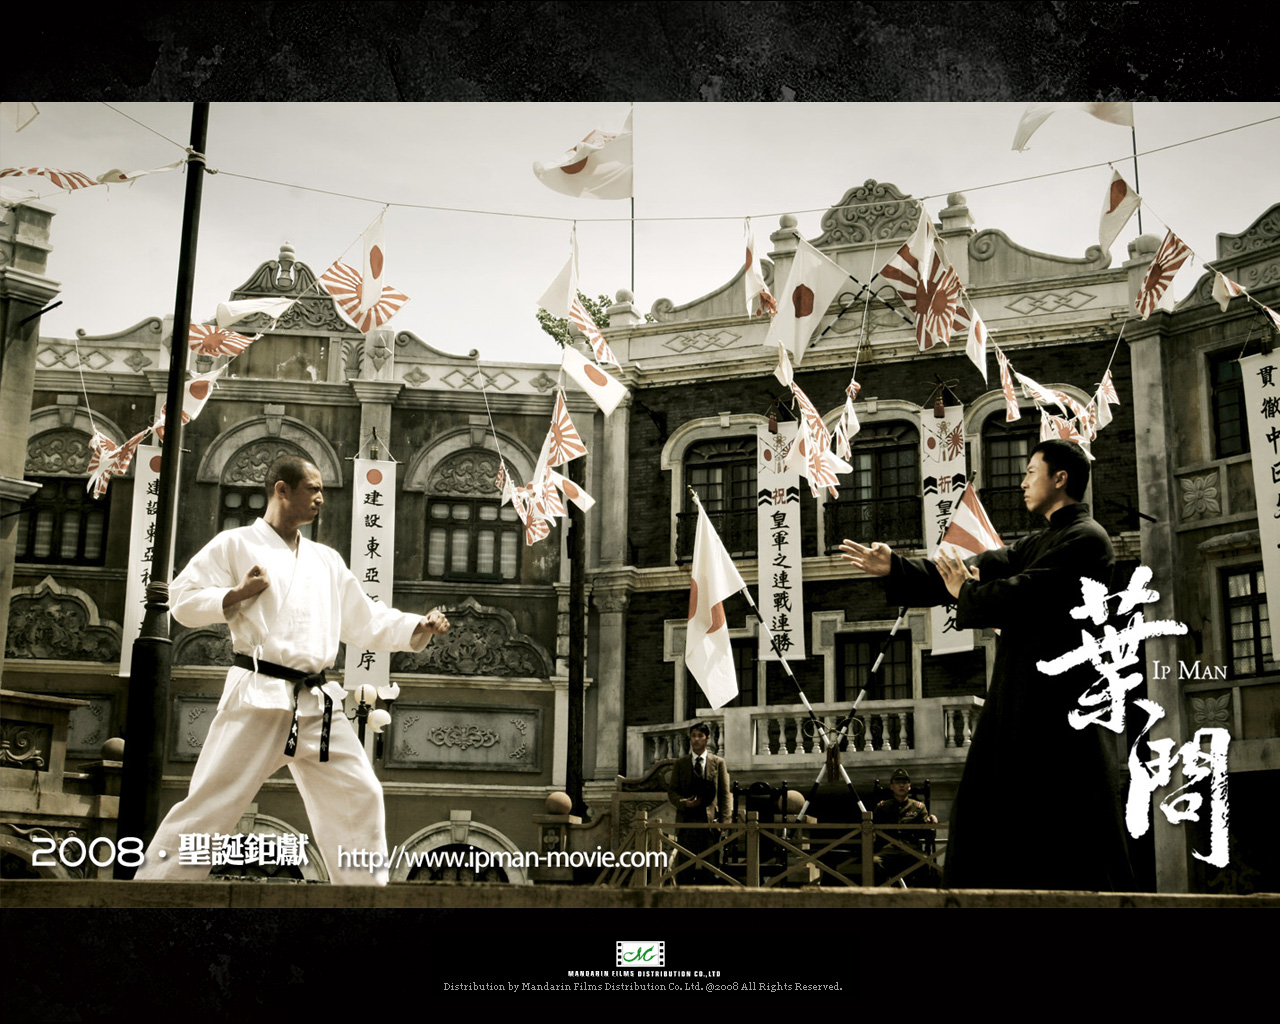 Ip Man wallpaper 08 in wallpapers album :: photos and posters in ...